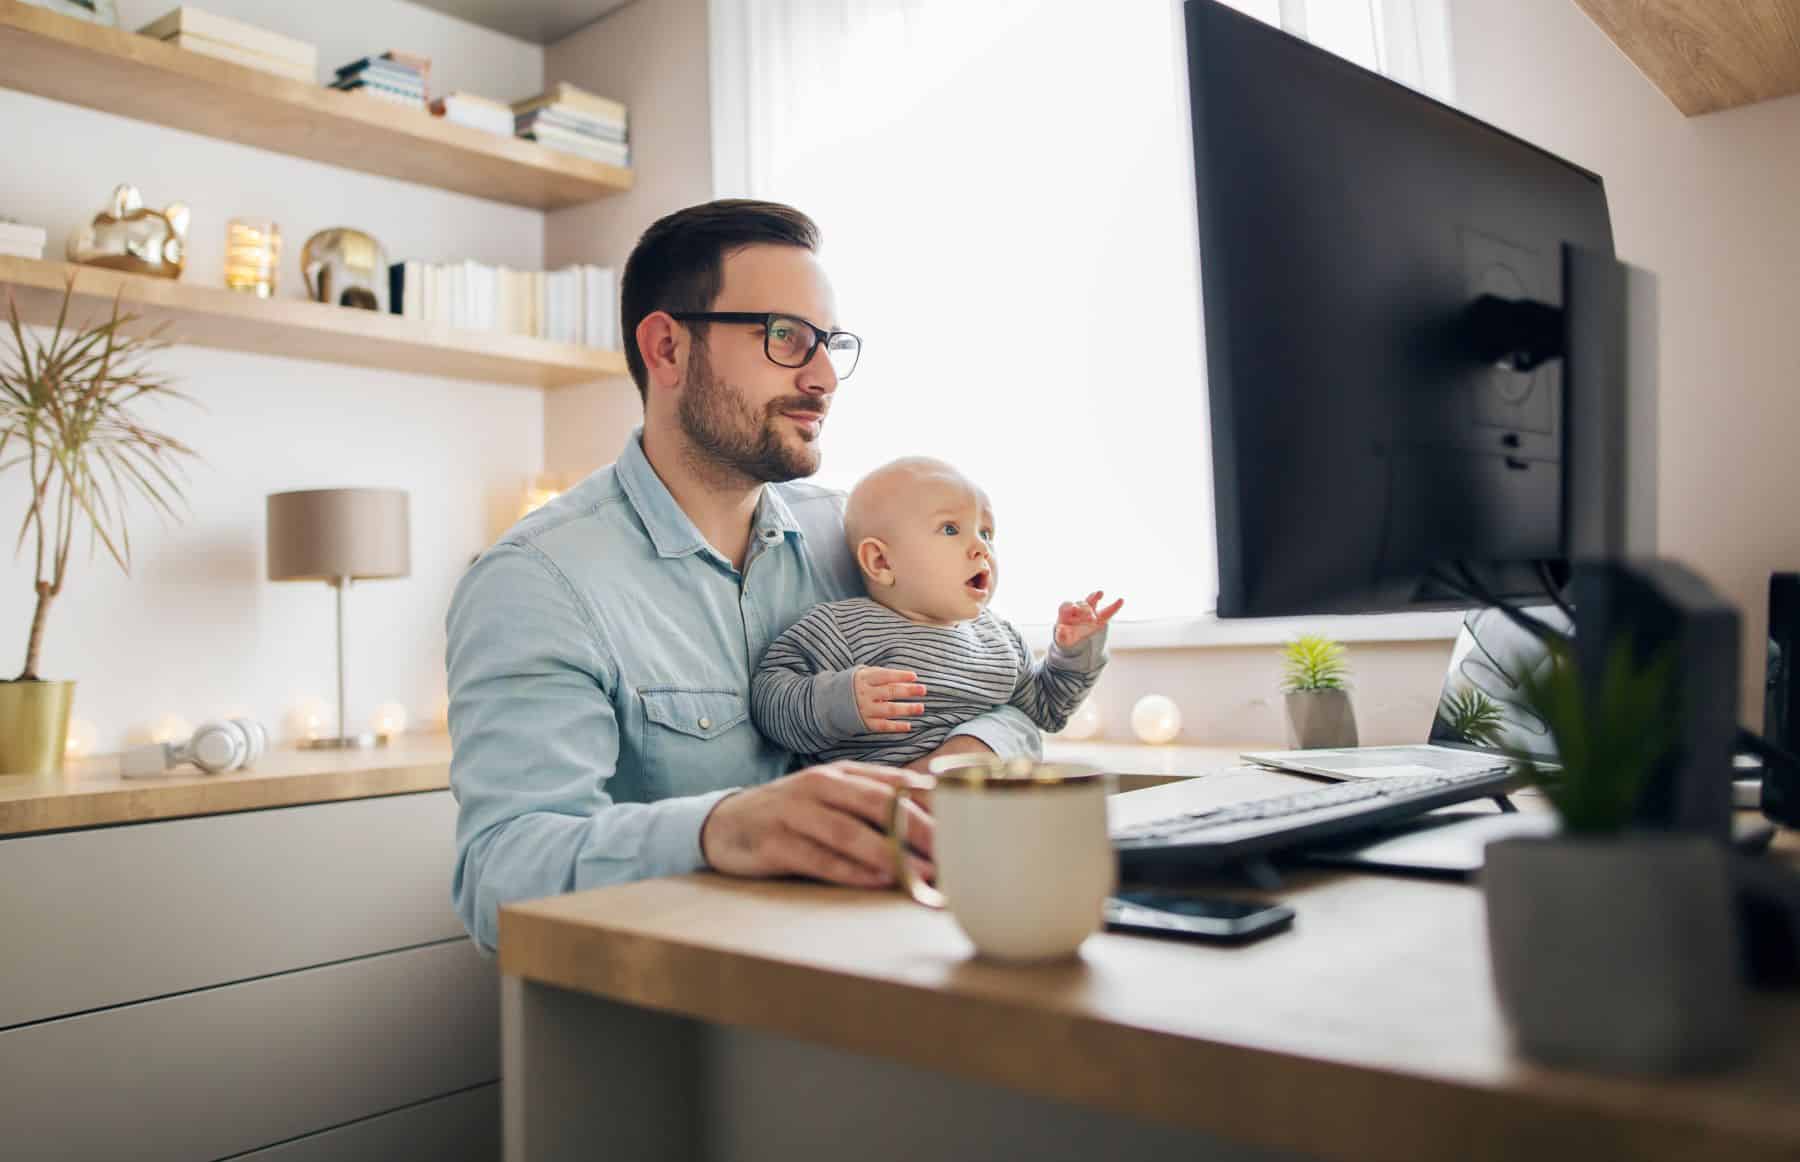 man in home office with baby on his lap